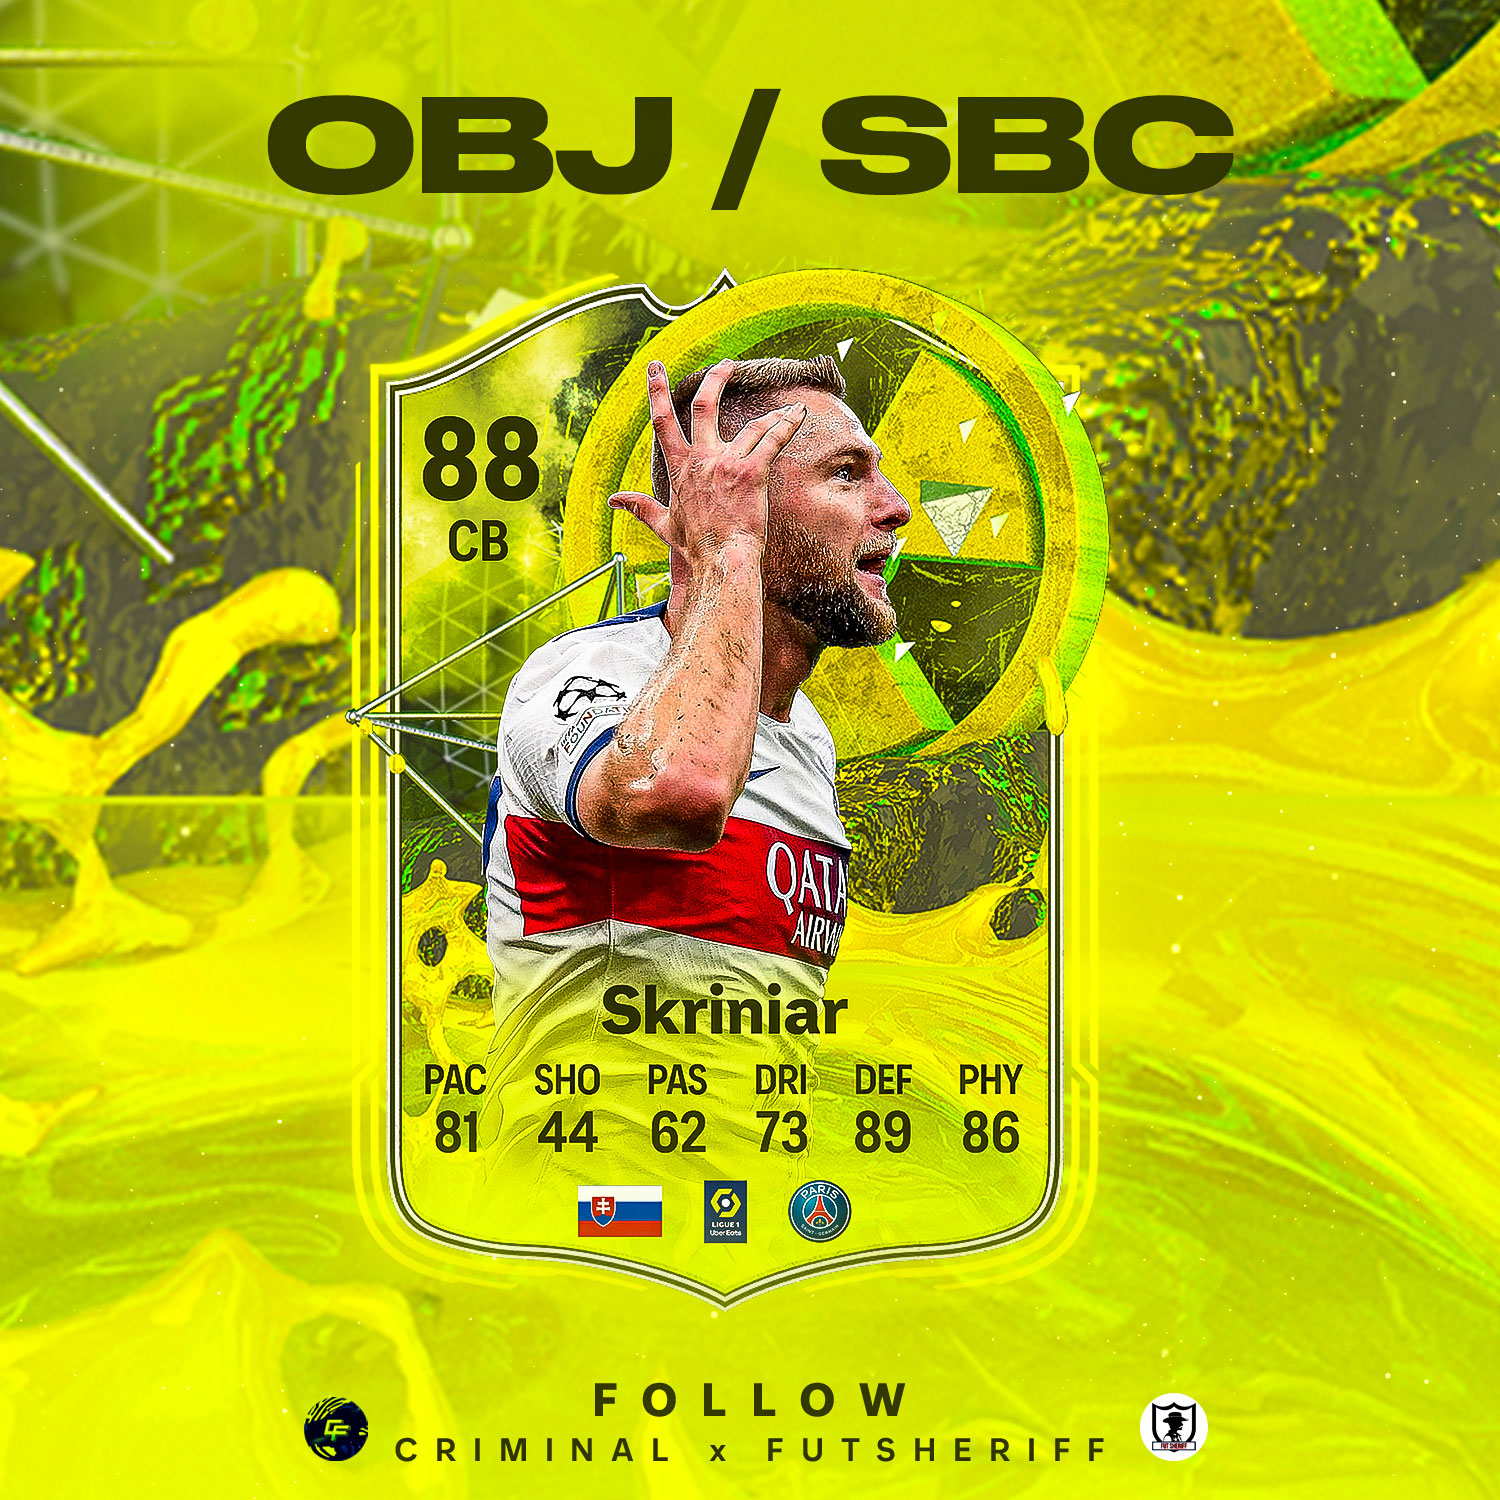 Fut Sheriff on X: 🚨Not a Leak!🚨 🚨PREDICTION FUTURE STARS!🔥✓ Are you  excited for one of the best promos of the year?👀 Collab and design with  @Criminal__x ❤️ Very beautiful ❤️  /